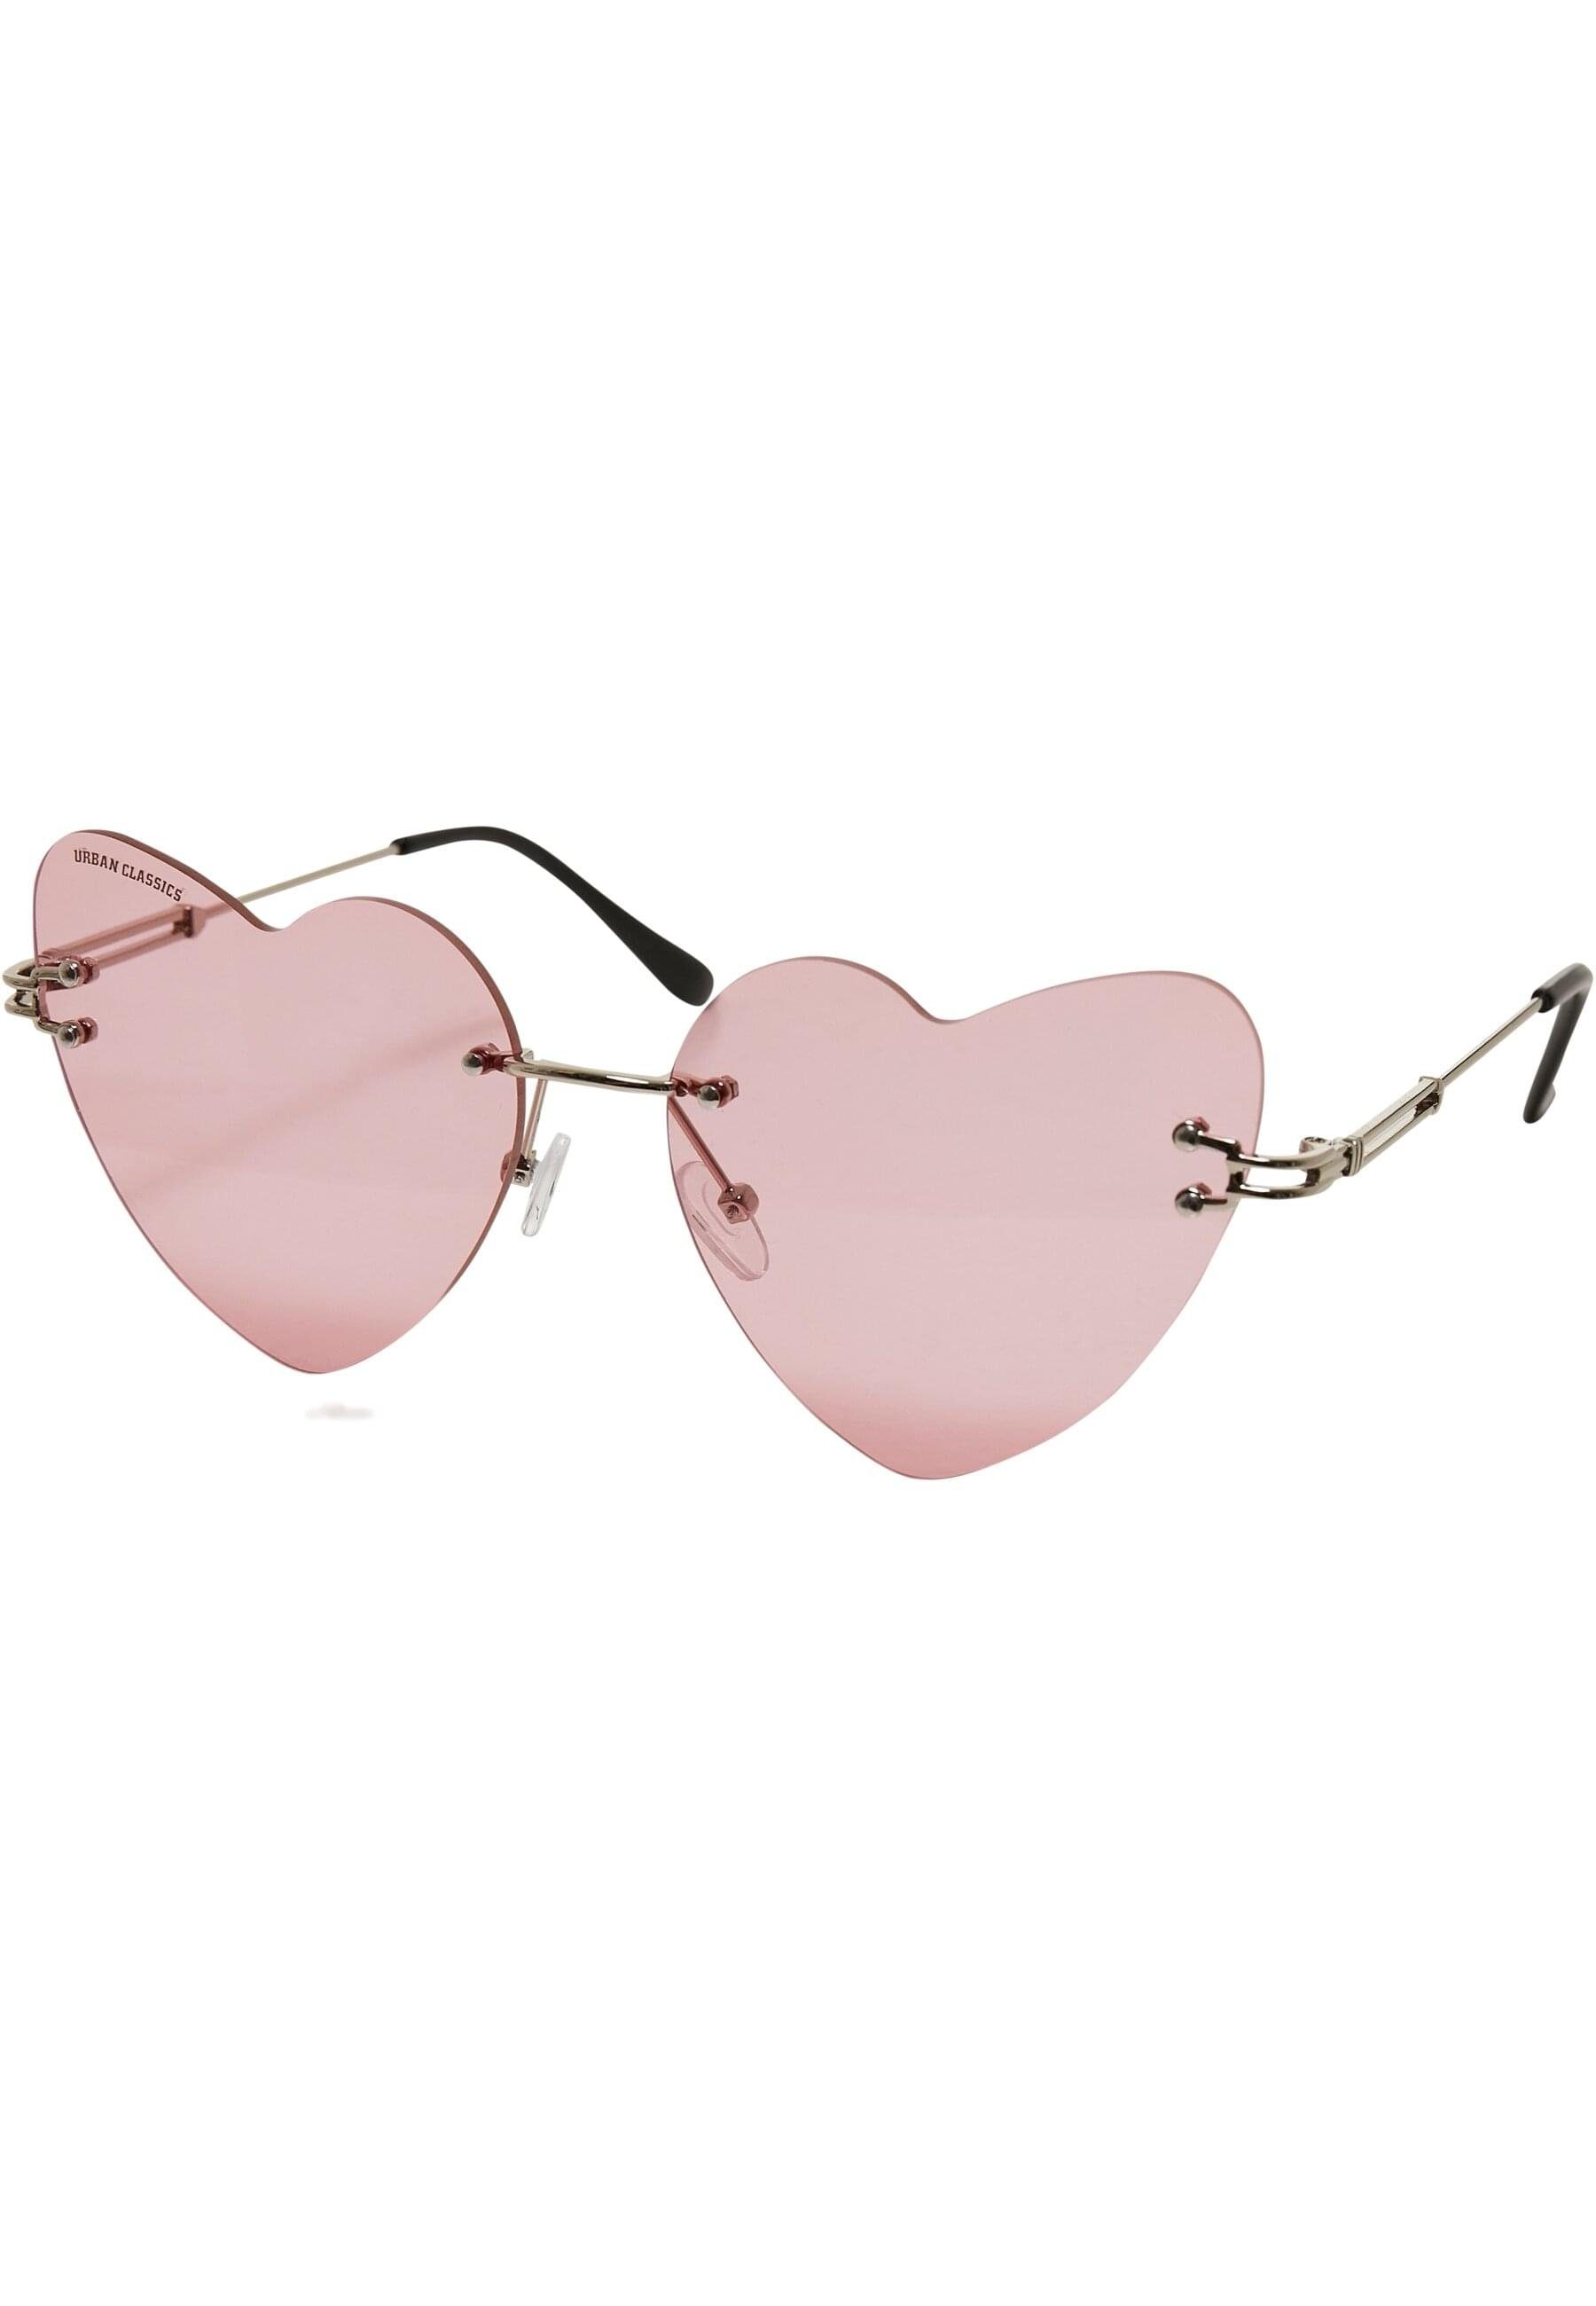 URBAN CLASSICS Sonnenbrille Sunglasses Heart Chain With Unisex rose/silver